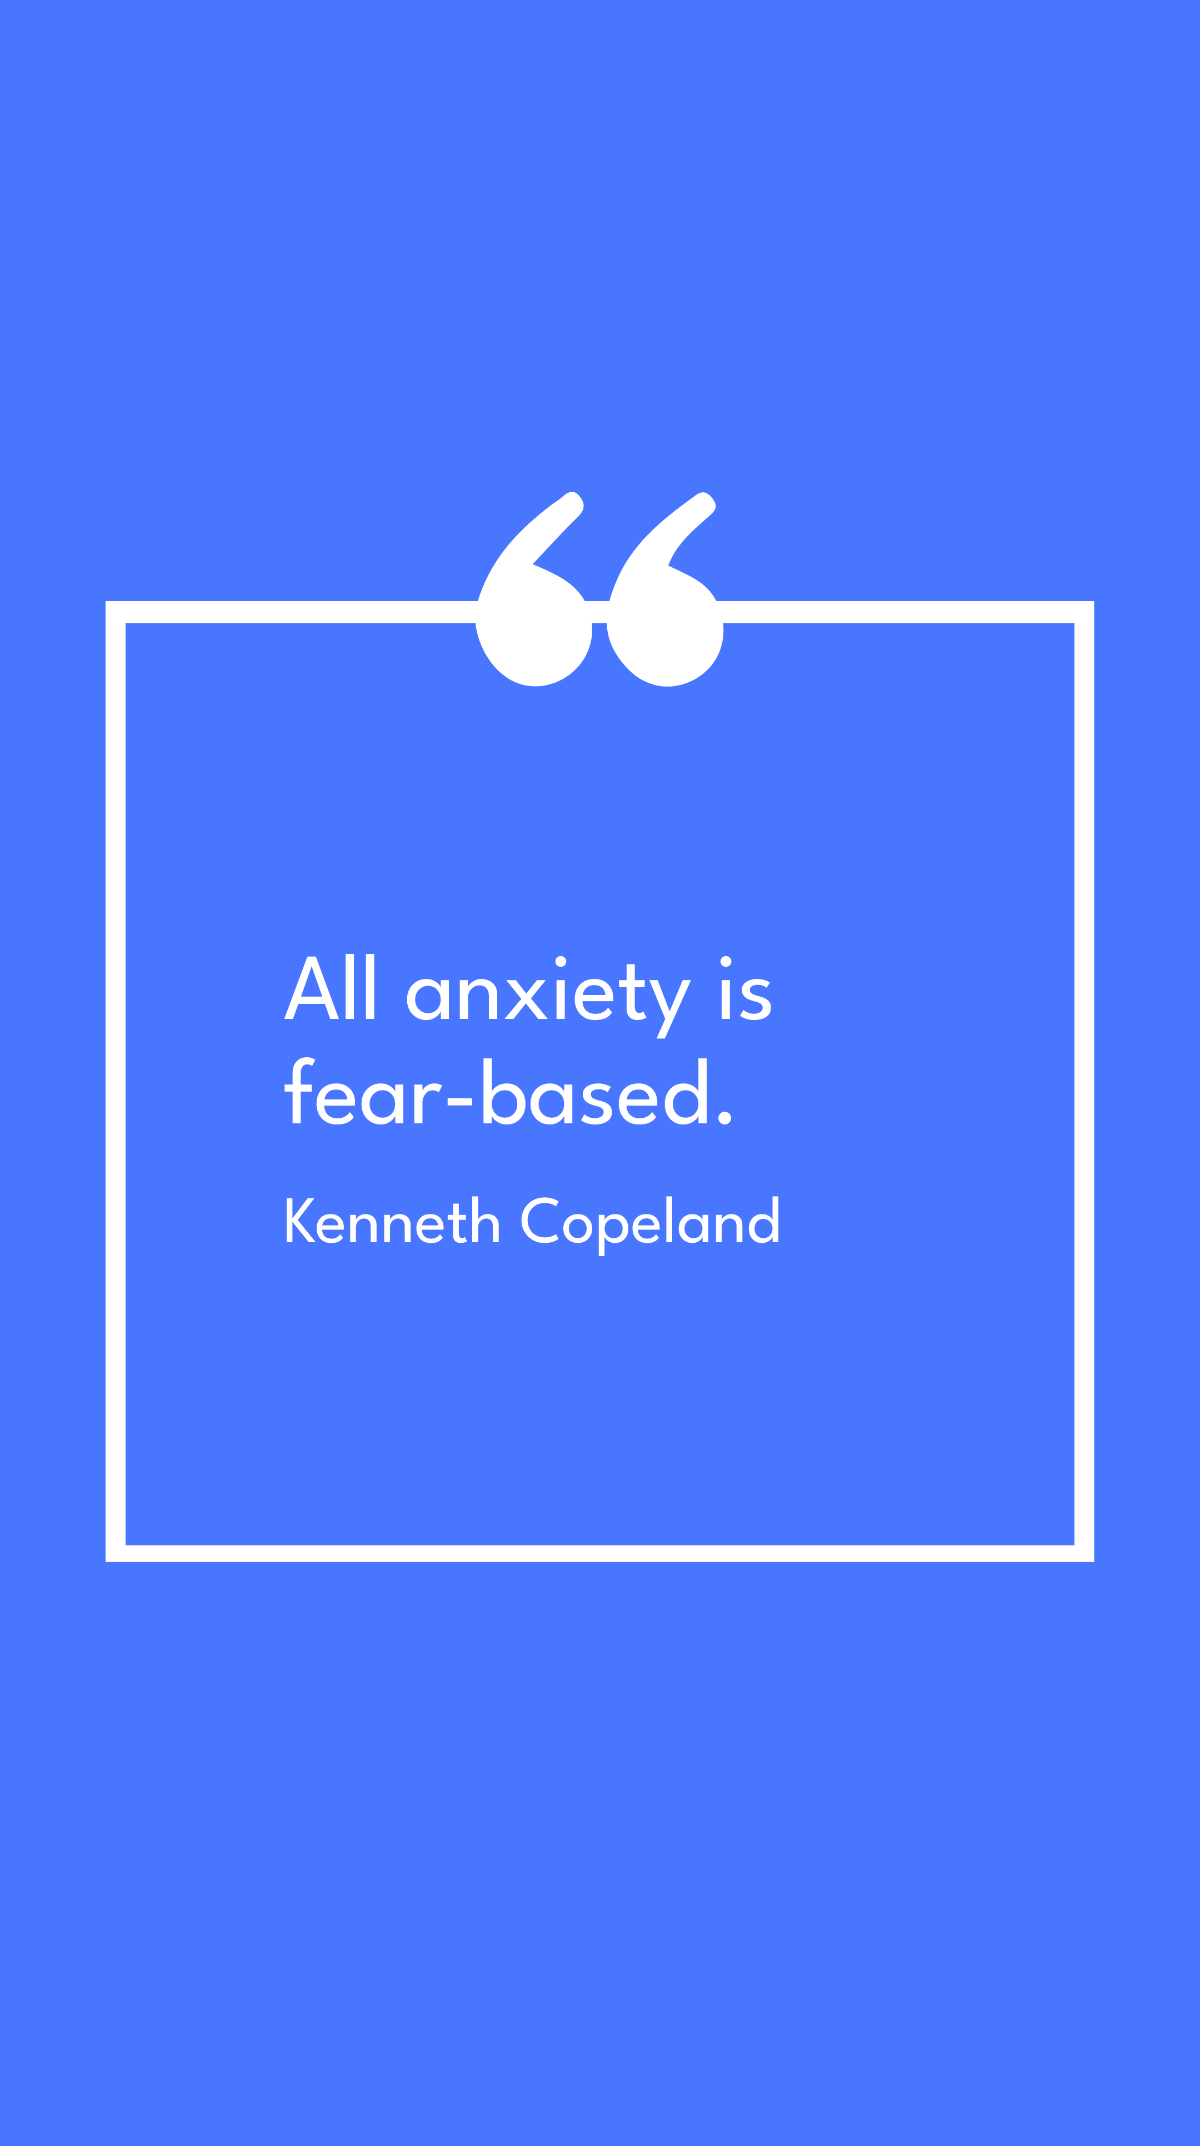 Kenneth Copeland - All anxiety is fear-based.